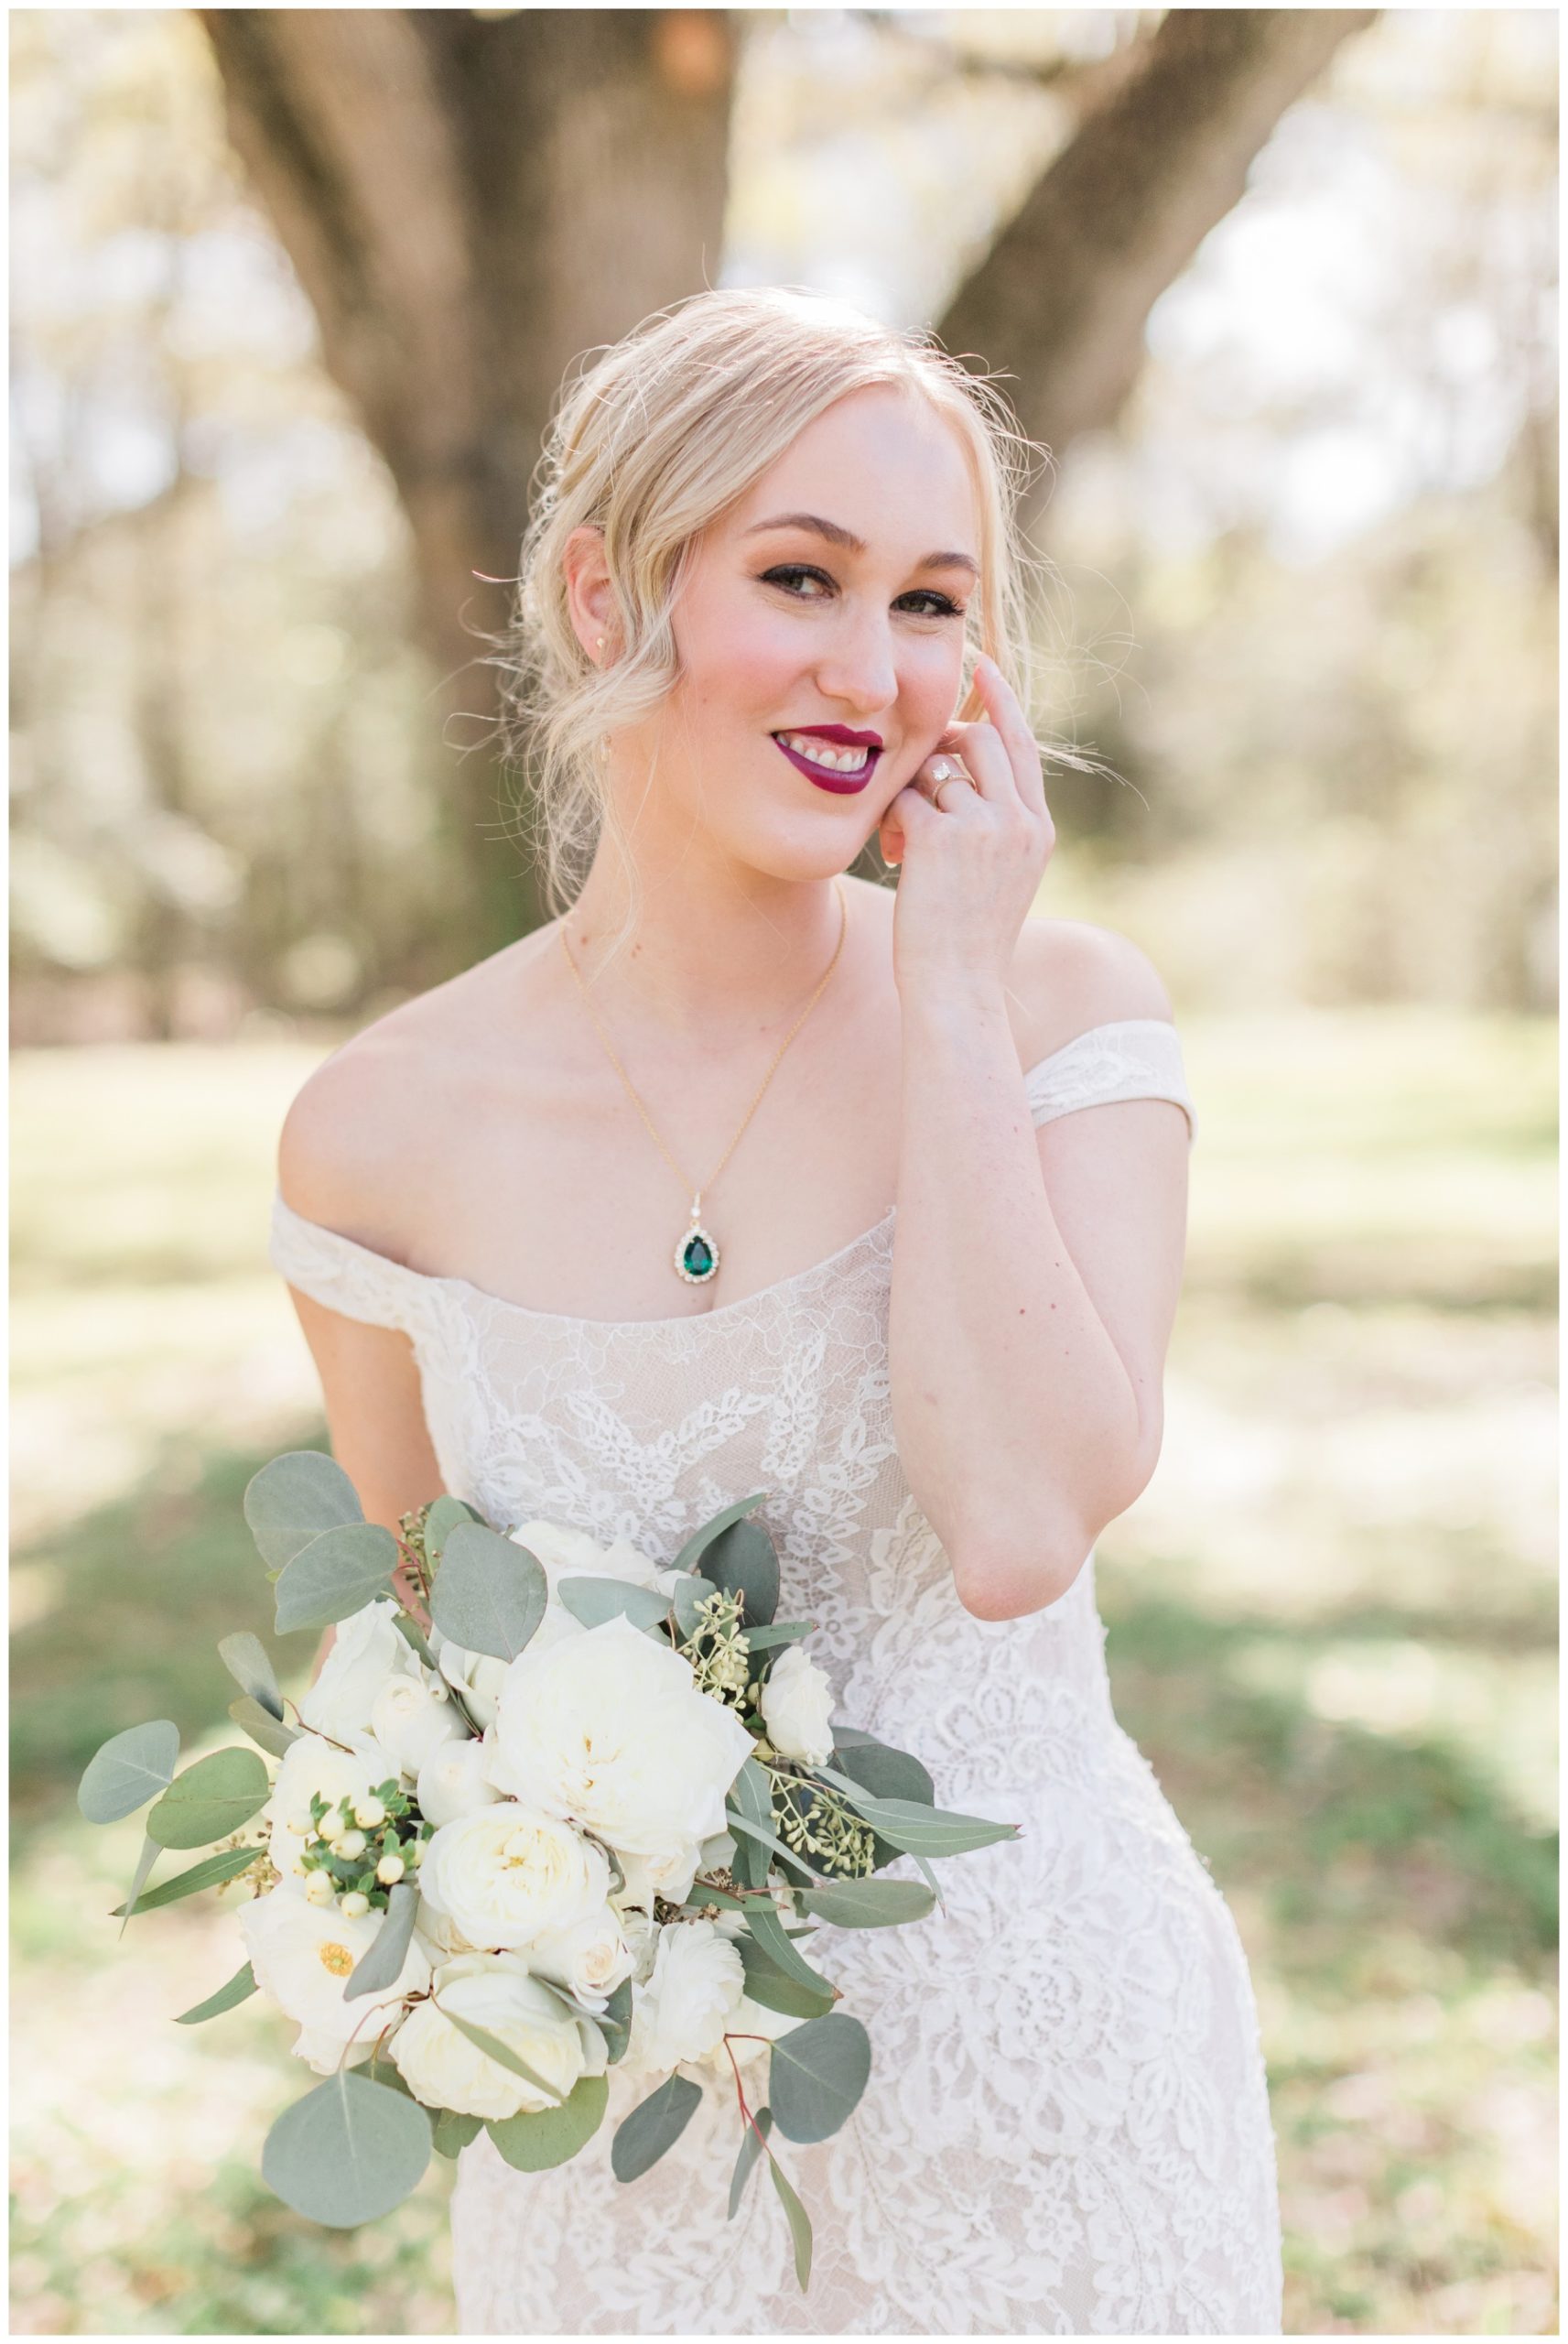 Bride wearing an off the shoulder lace wedding gown and a gold emerald necklace